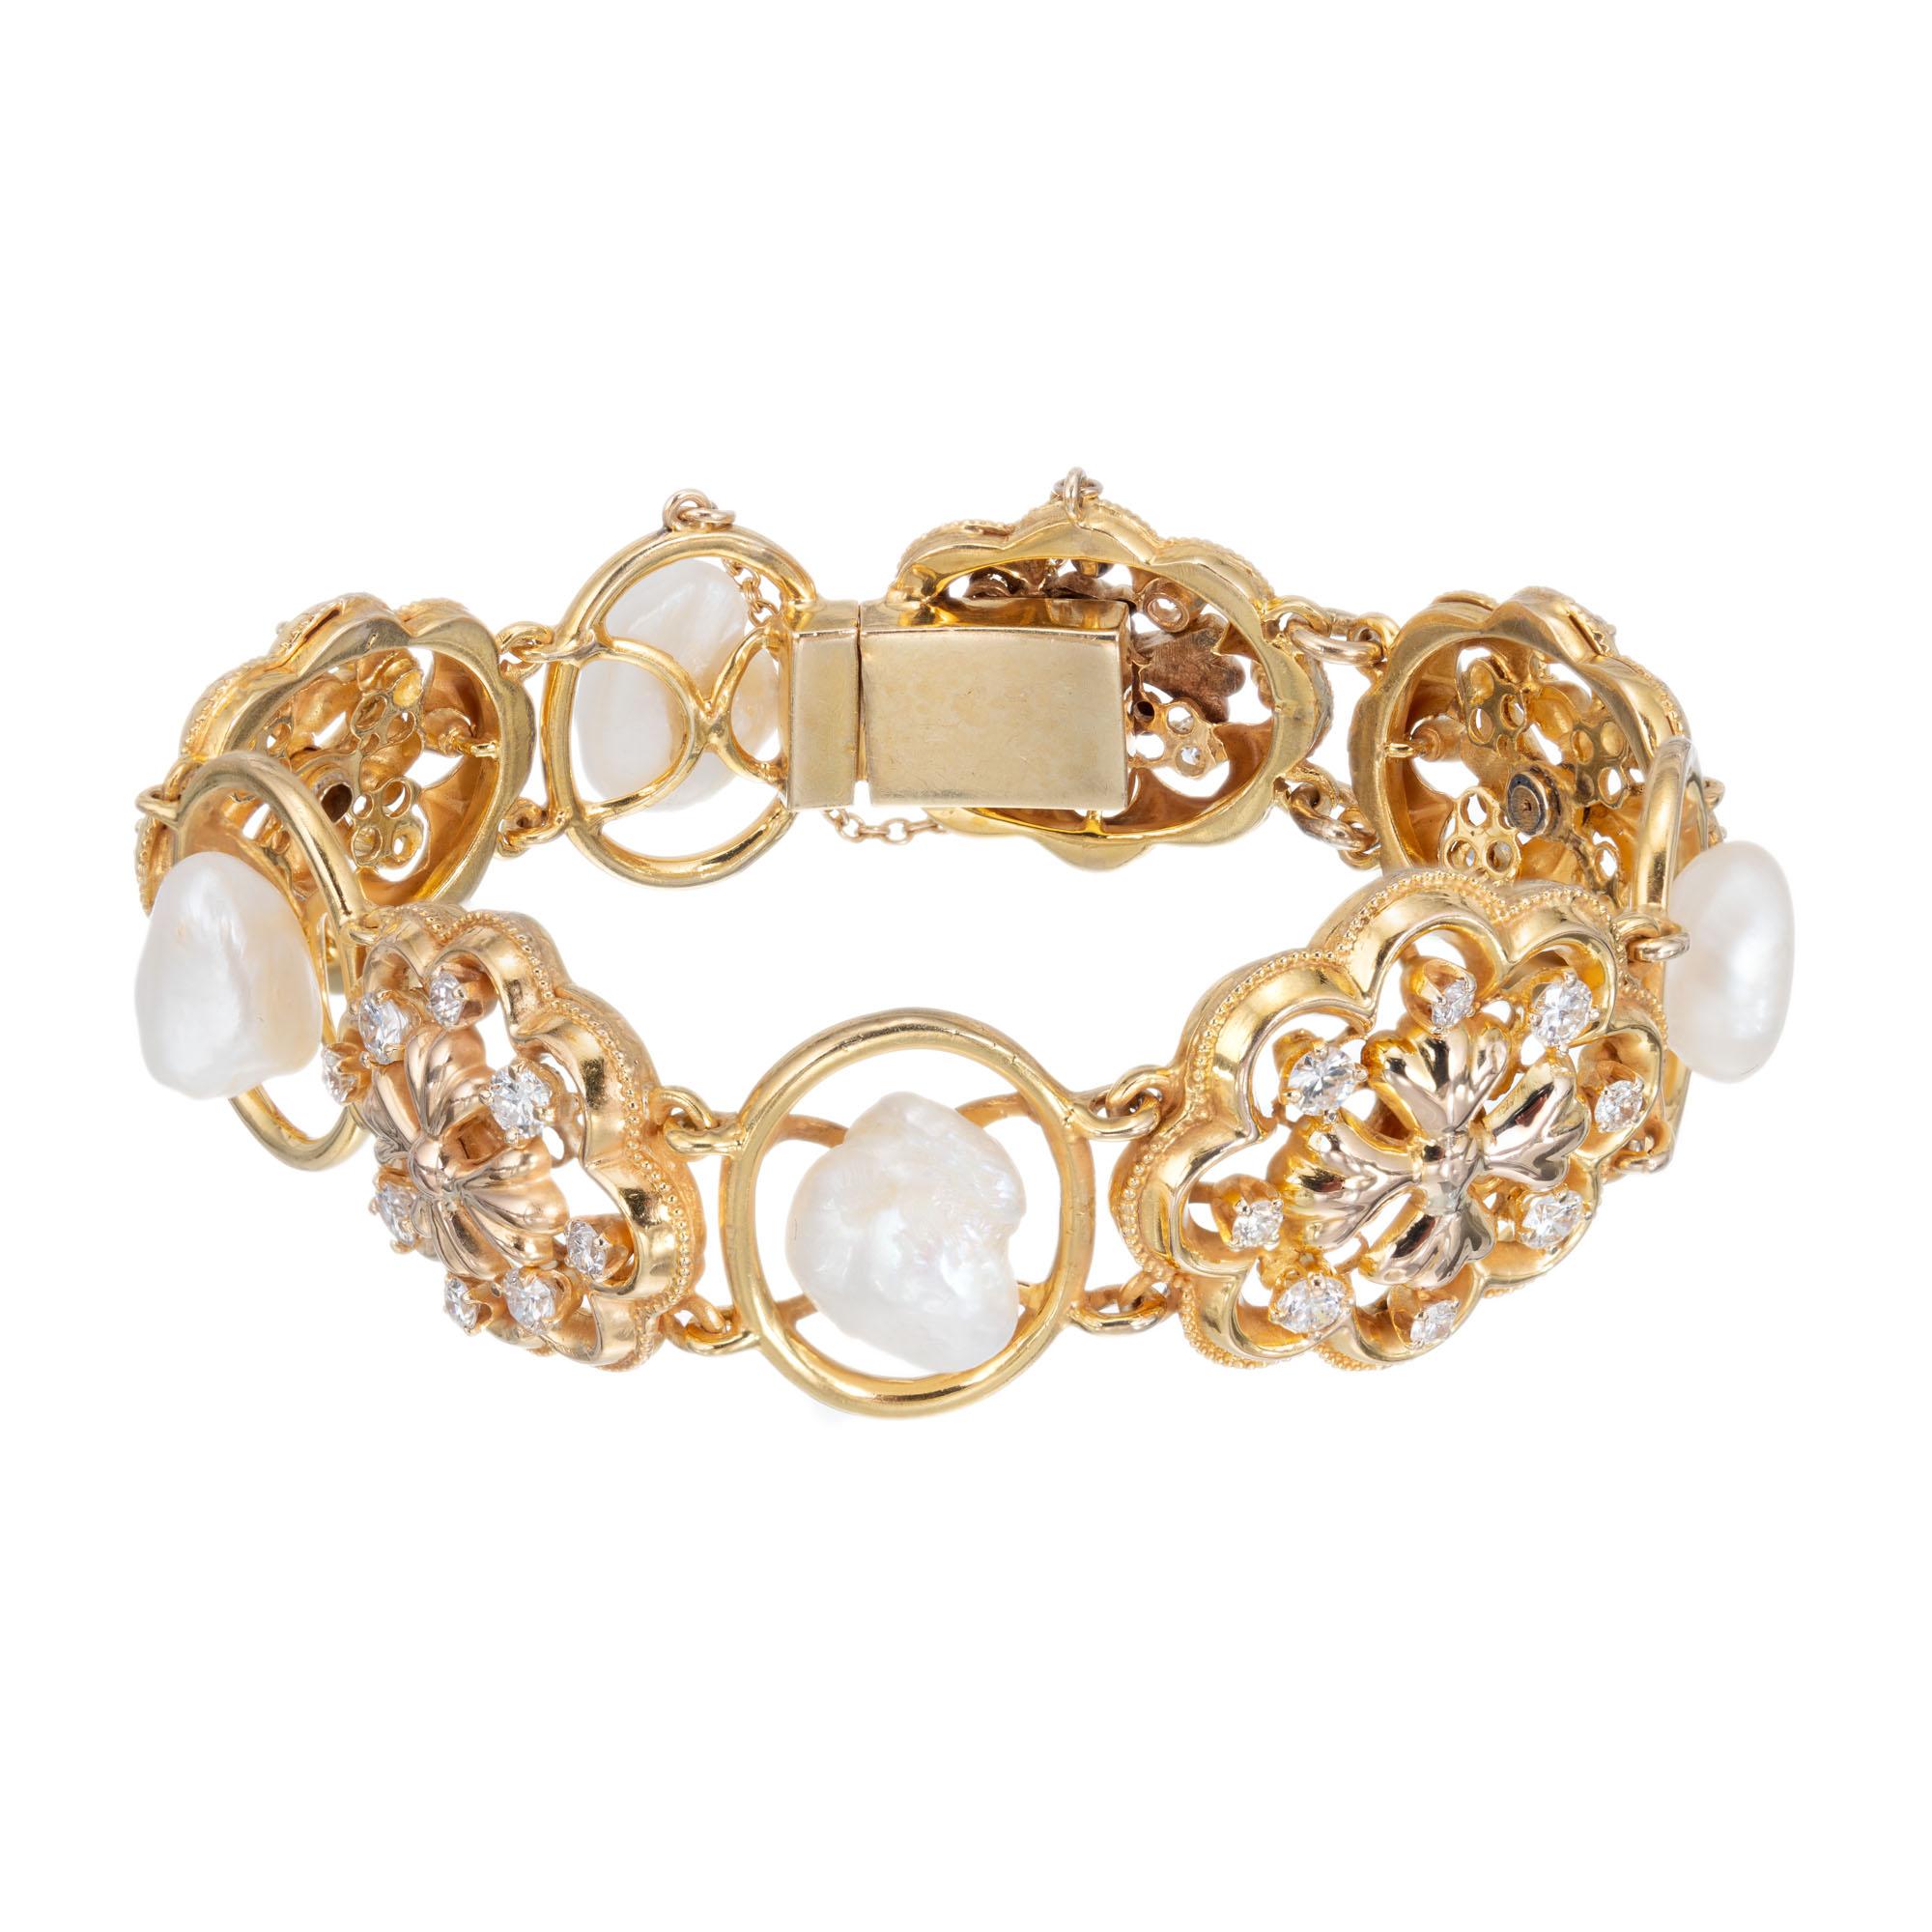 GIA certified natural baroque freshwater pearl and diamond bracelet in 14k yellow gold. Handmade circa 1930's in Victorian revival style with a safety chain. 

4 natural white with Orient overtones baroque pearls unionidae freshwater 11.47 x 9.48mm